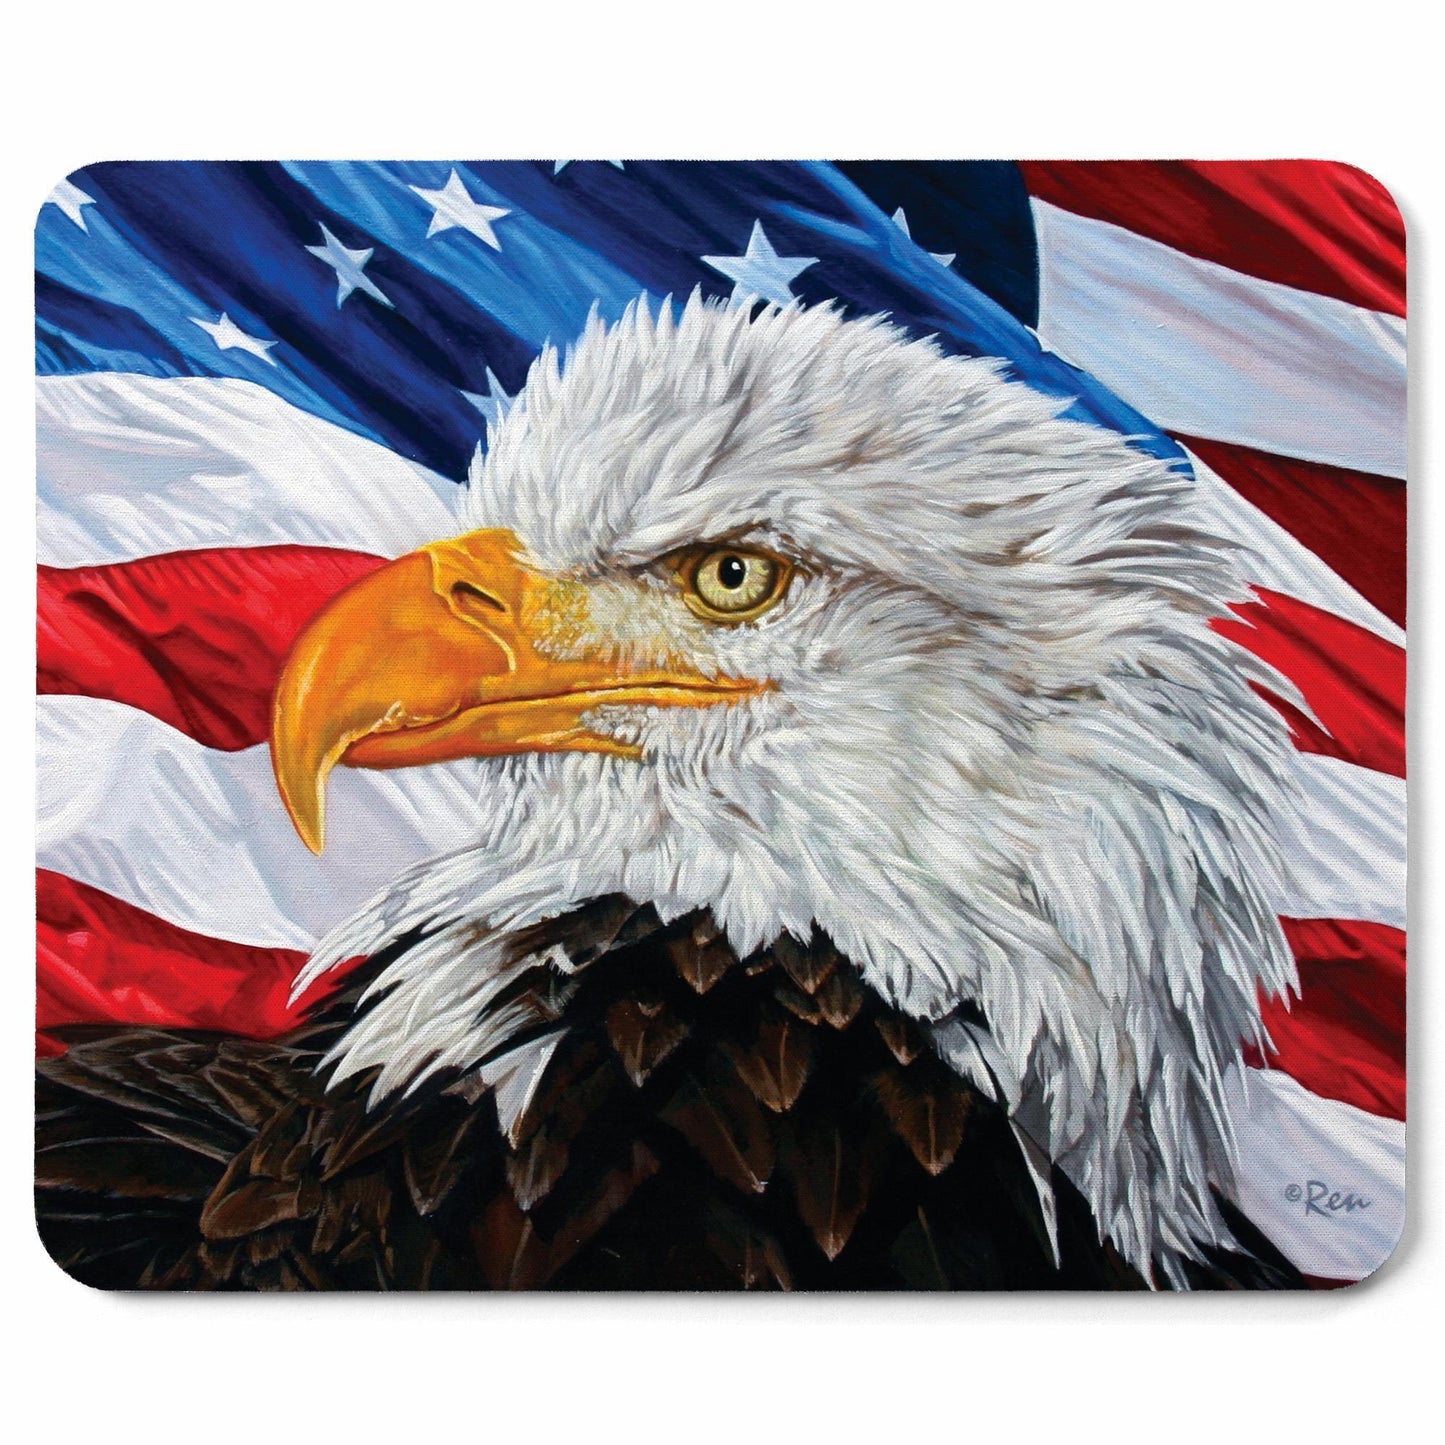 Let Freedom Ring Mouse Pad - Wild Wings